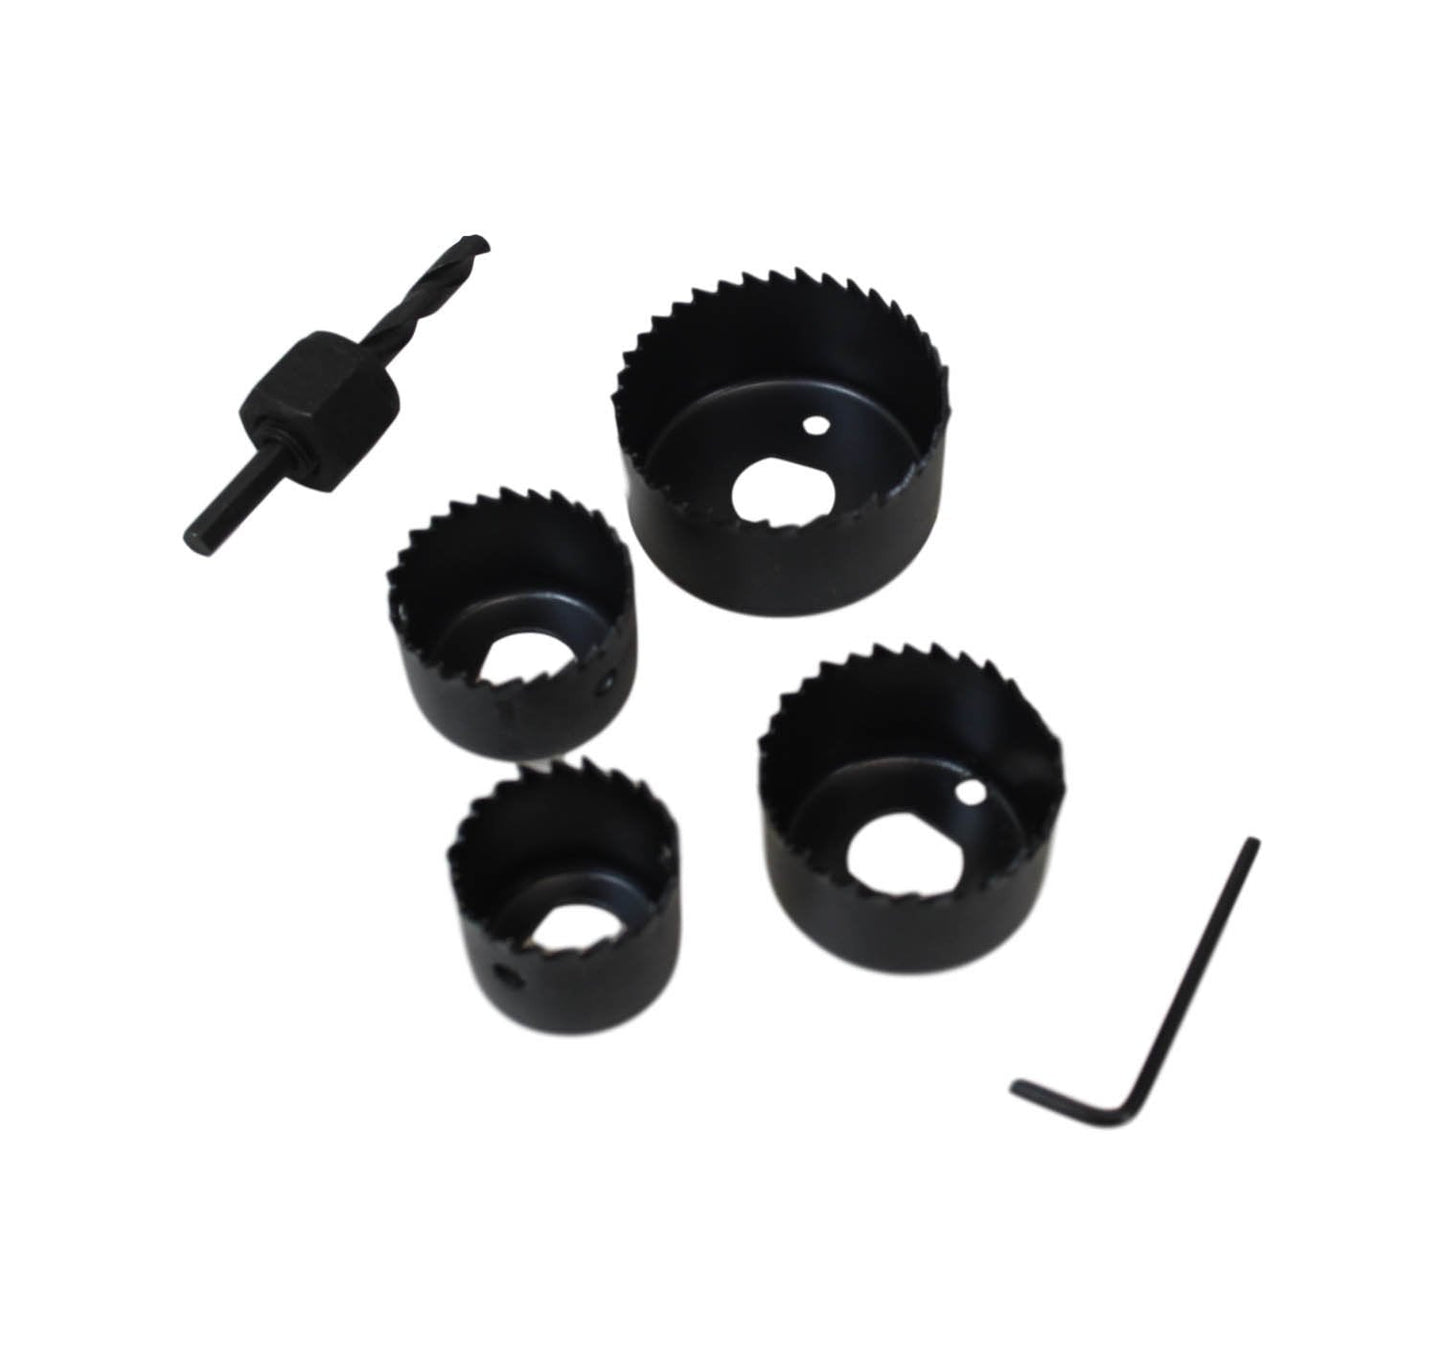 Hole Saw Cutter Set of 6 6556 (Parcel Rate)